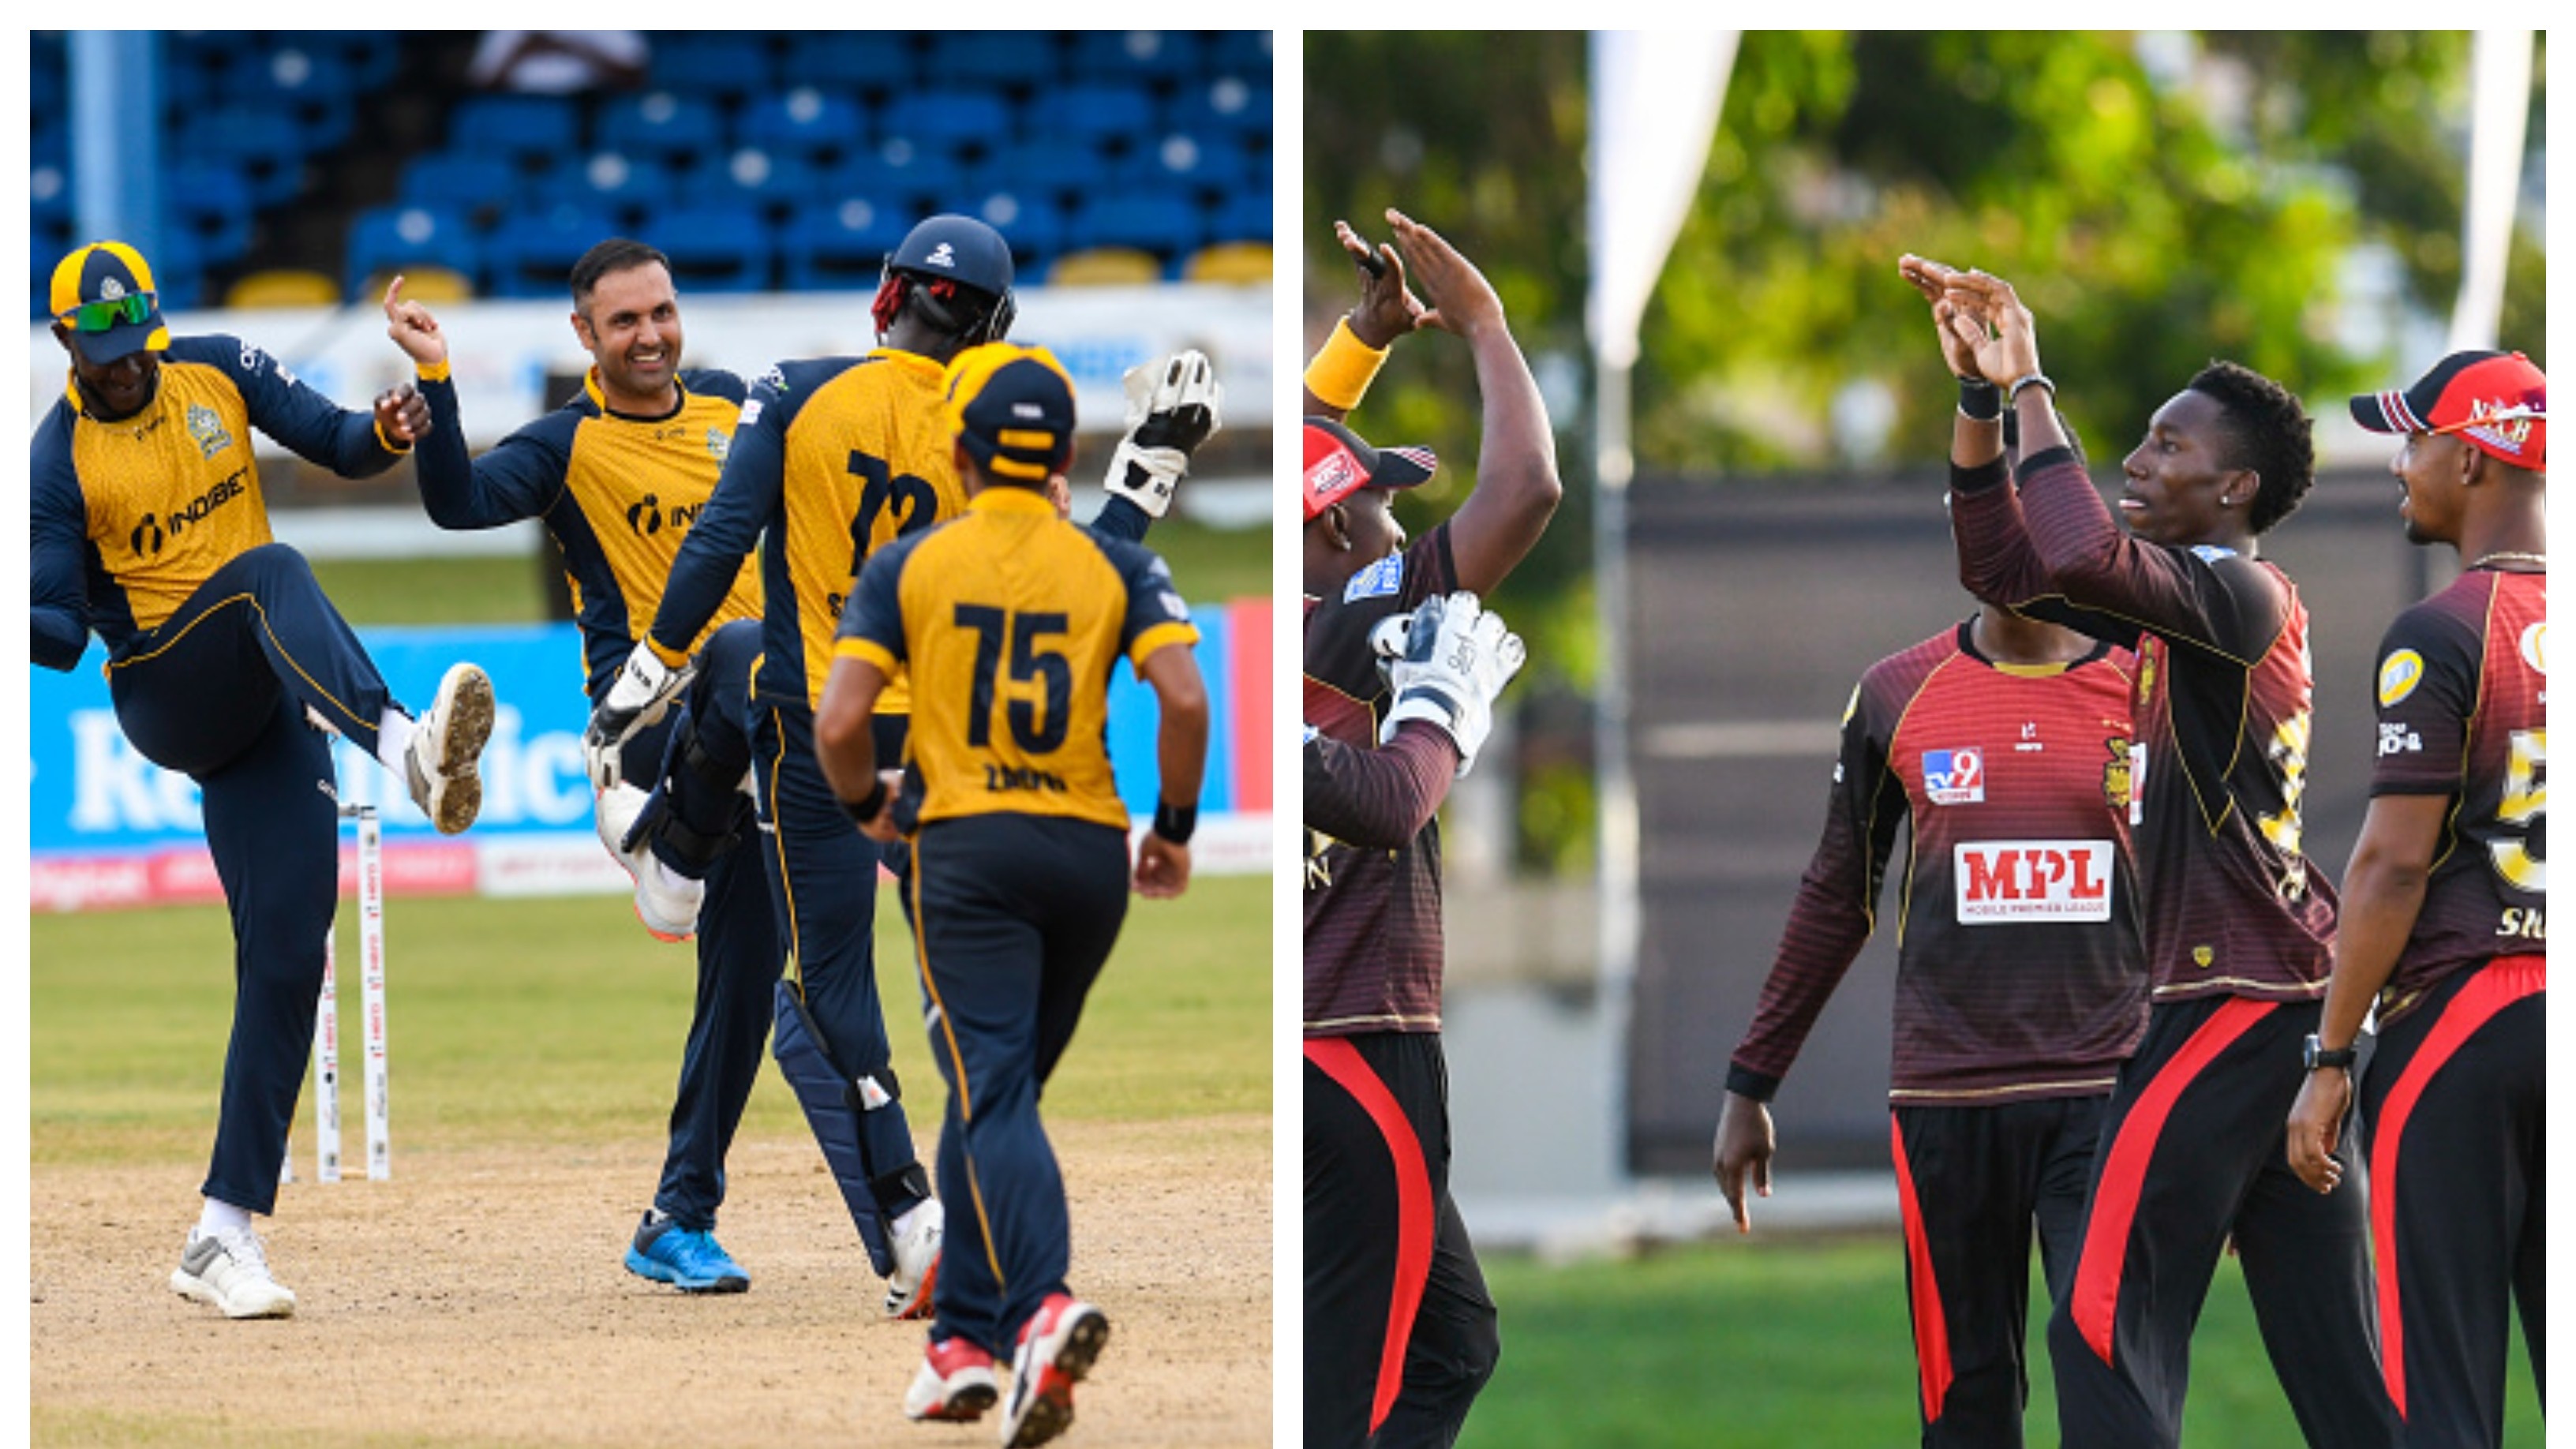 CPL 2020: Nabi's five-fer helps Zouks dominate Patriots; Pierre shines in Knight Riders victory over Warriors